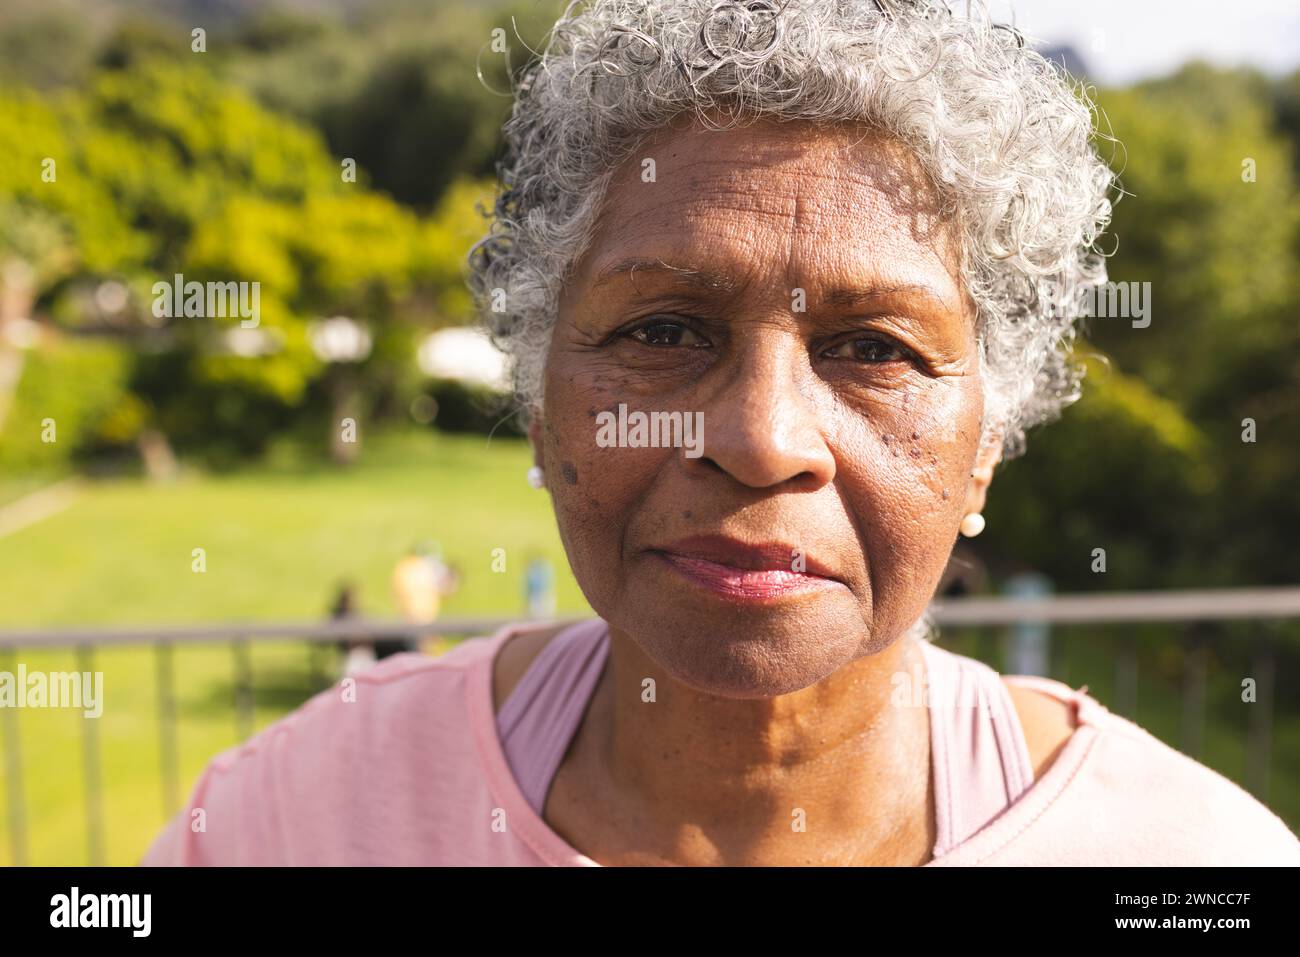 Senior biracial woman with grey hair and warm brown eyes stands outdoors Stock Photo